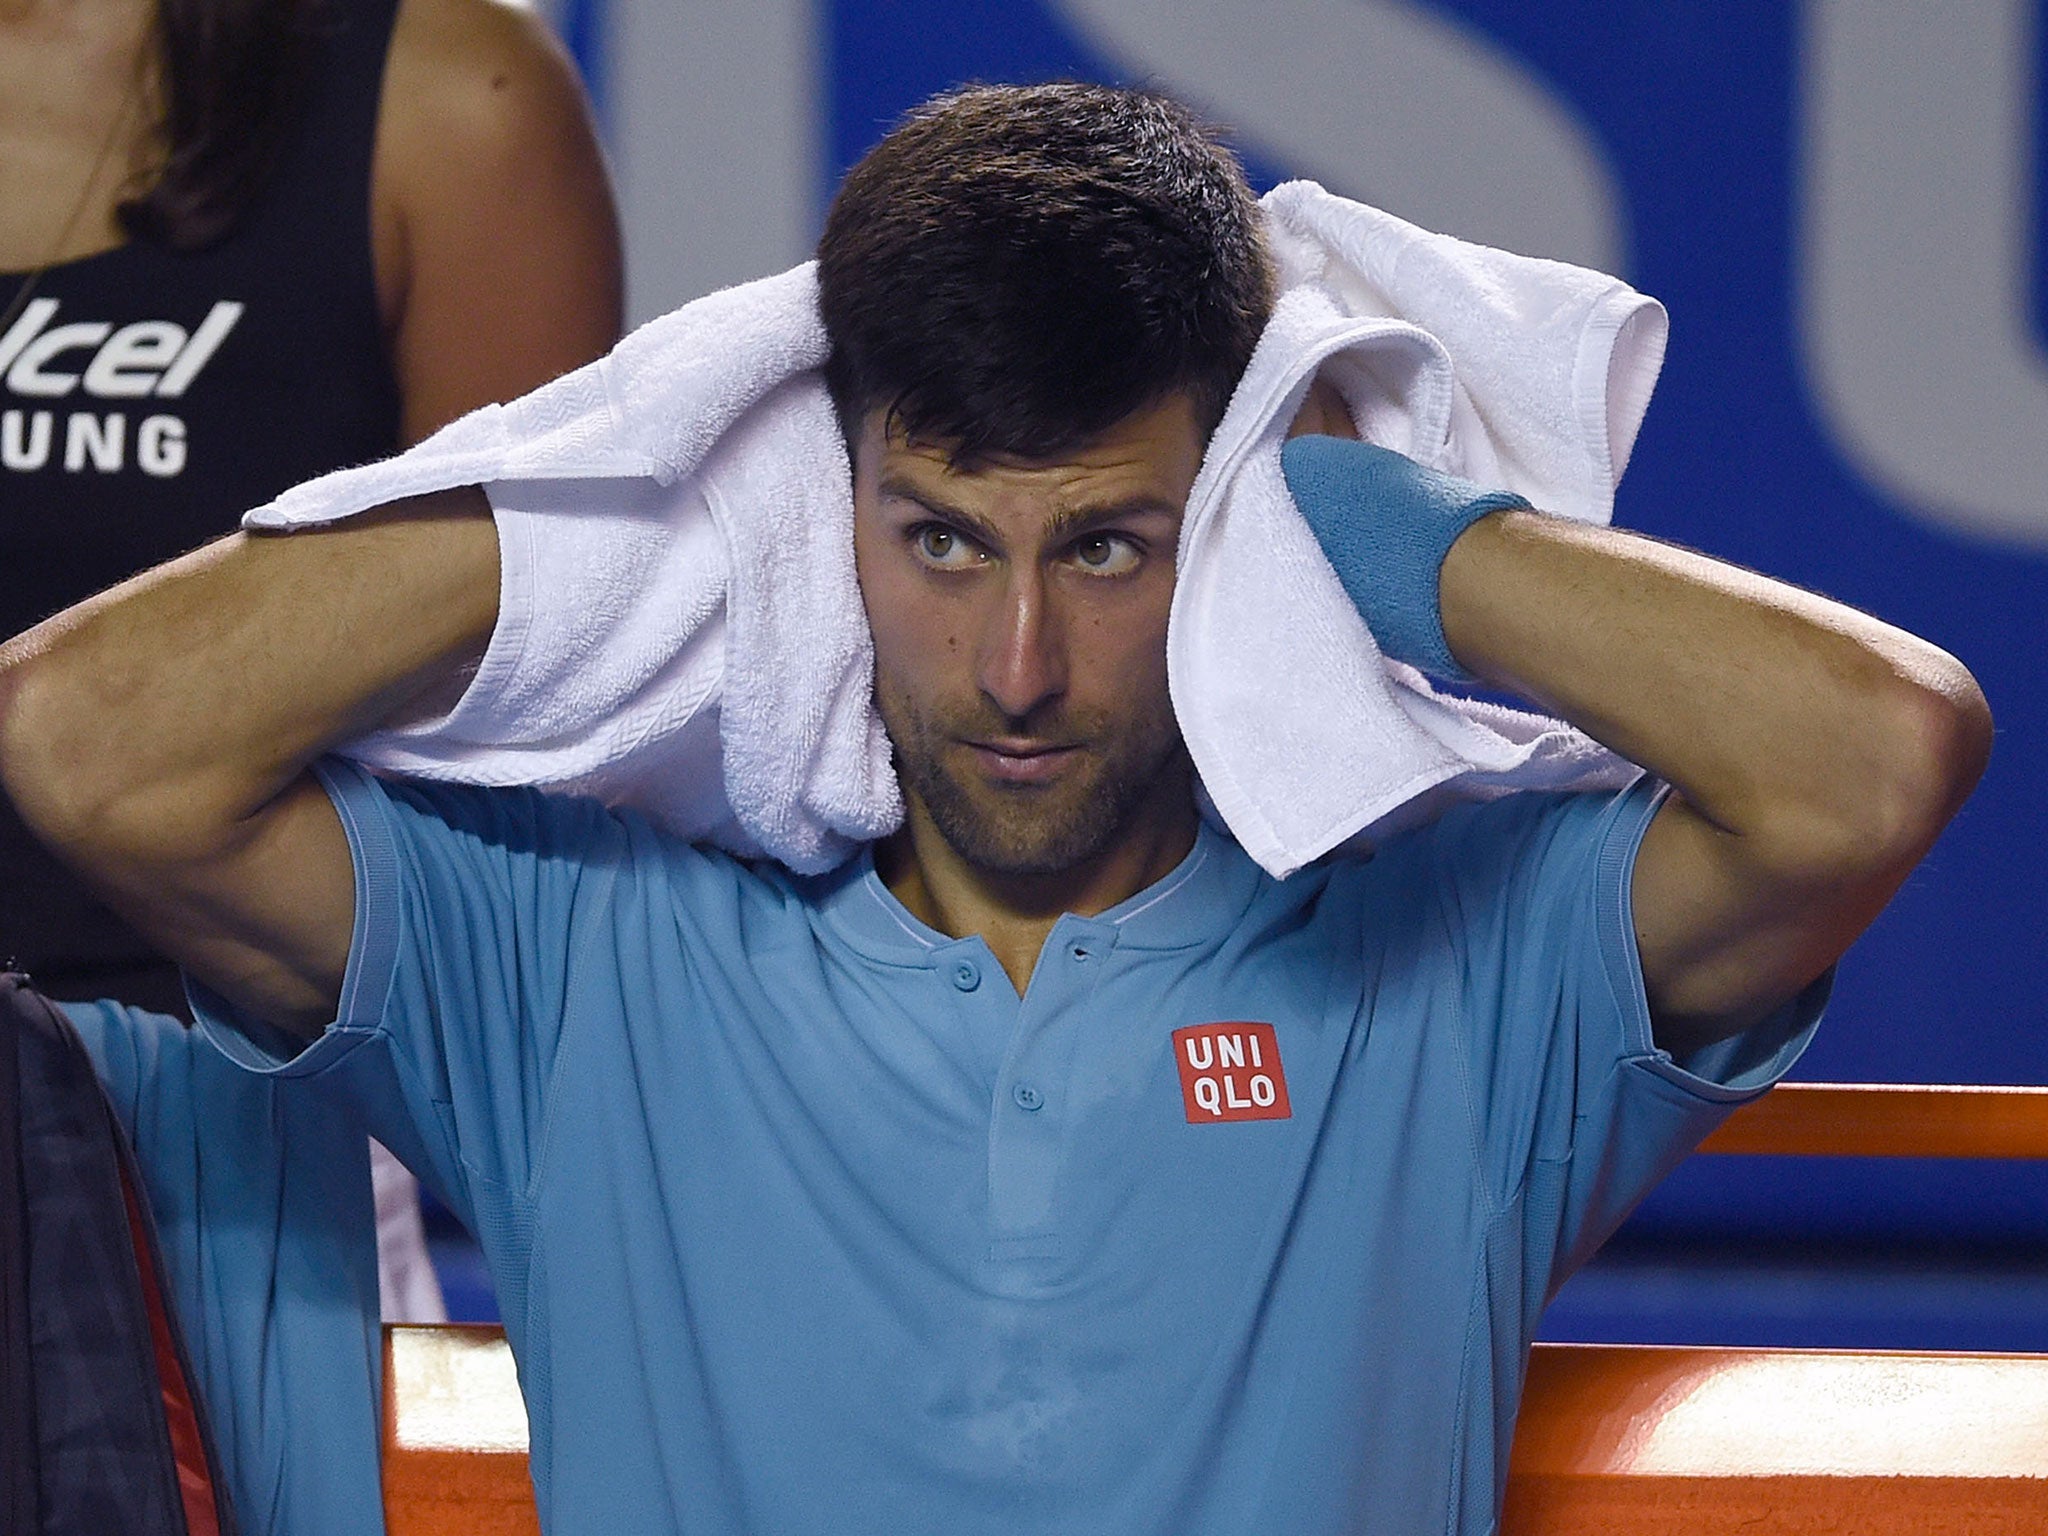 Novak Djokovic suffered a surprise quarter-final defeat by Nick Kyrgios in Acapulco